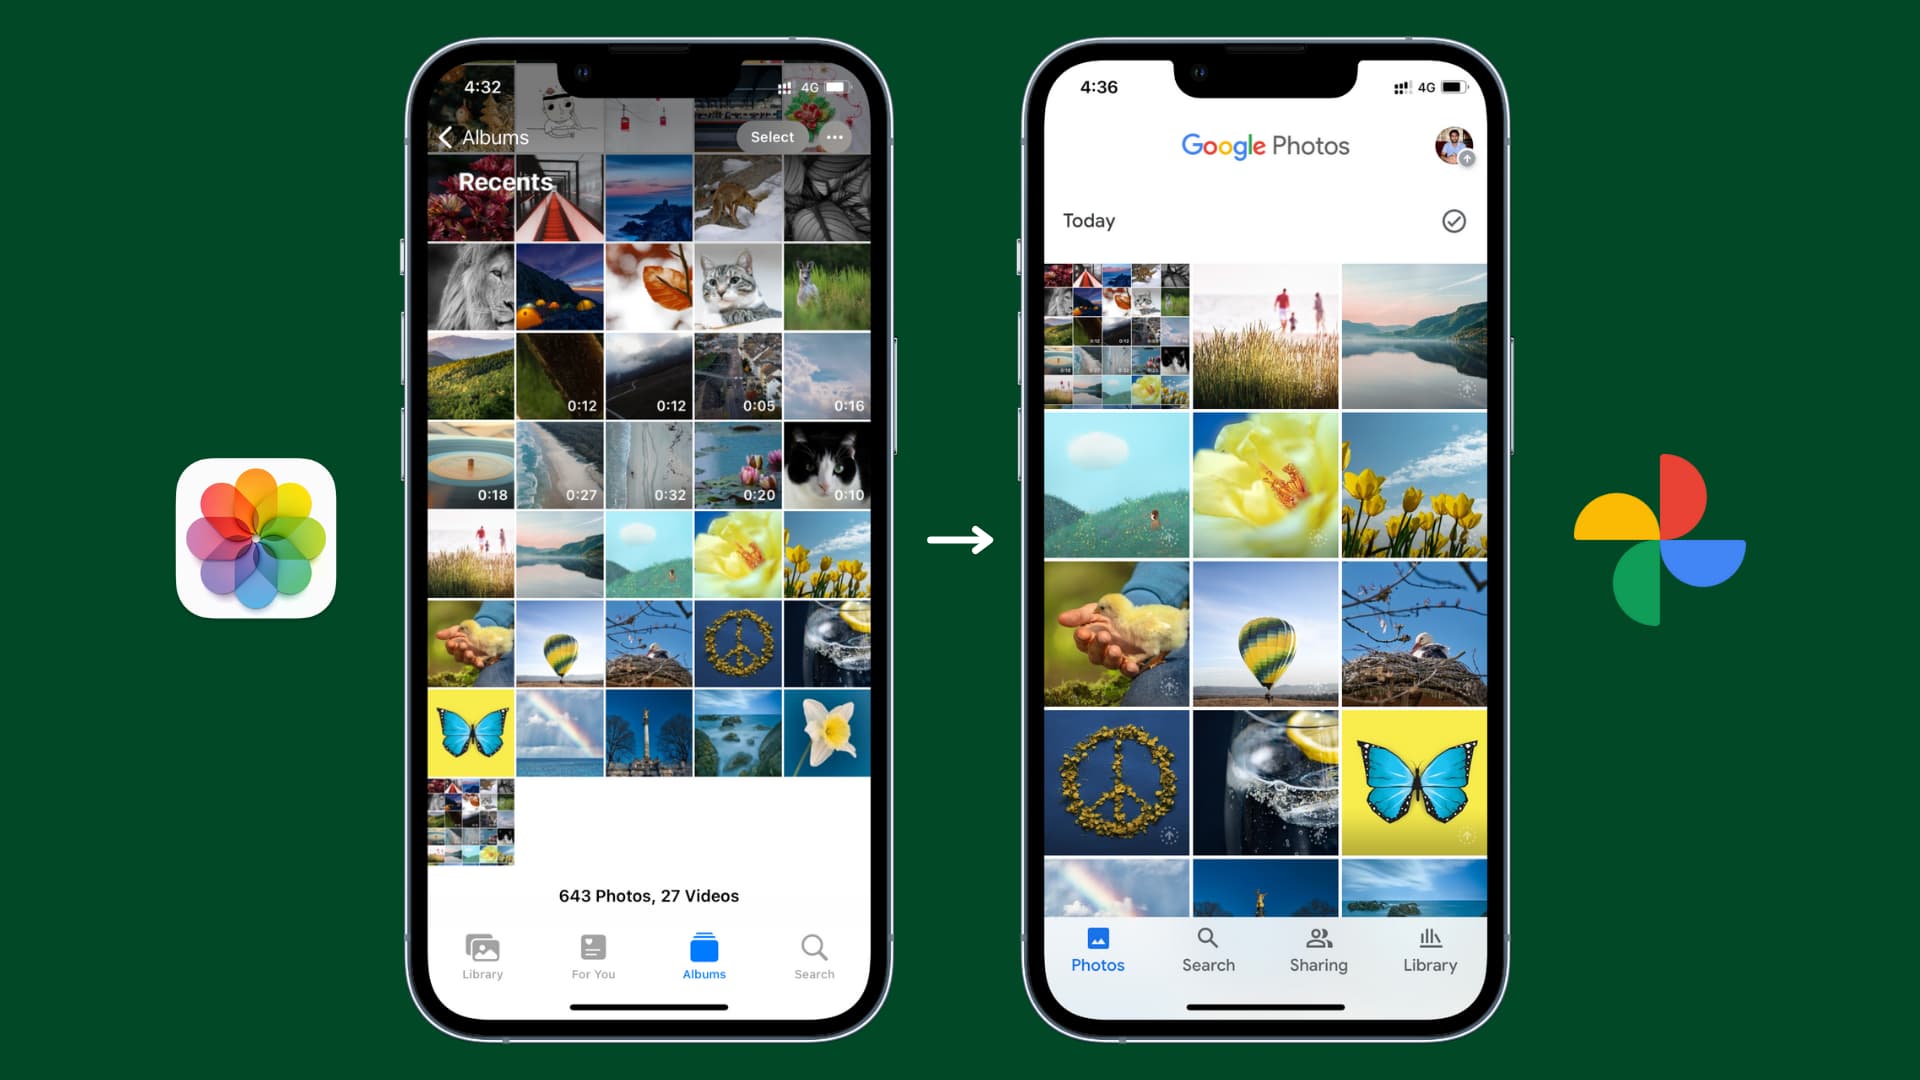 How To Upload Photos To Google Photos On Iphone